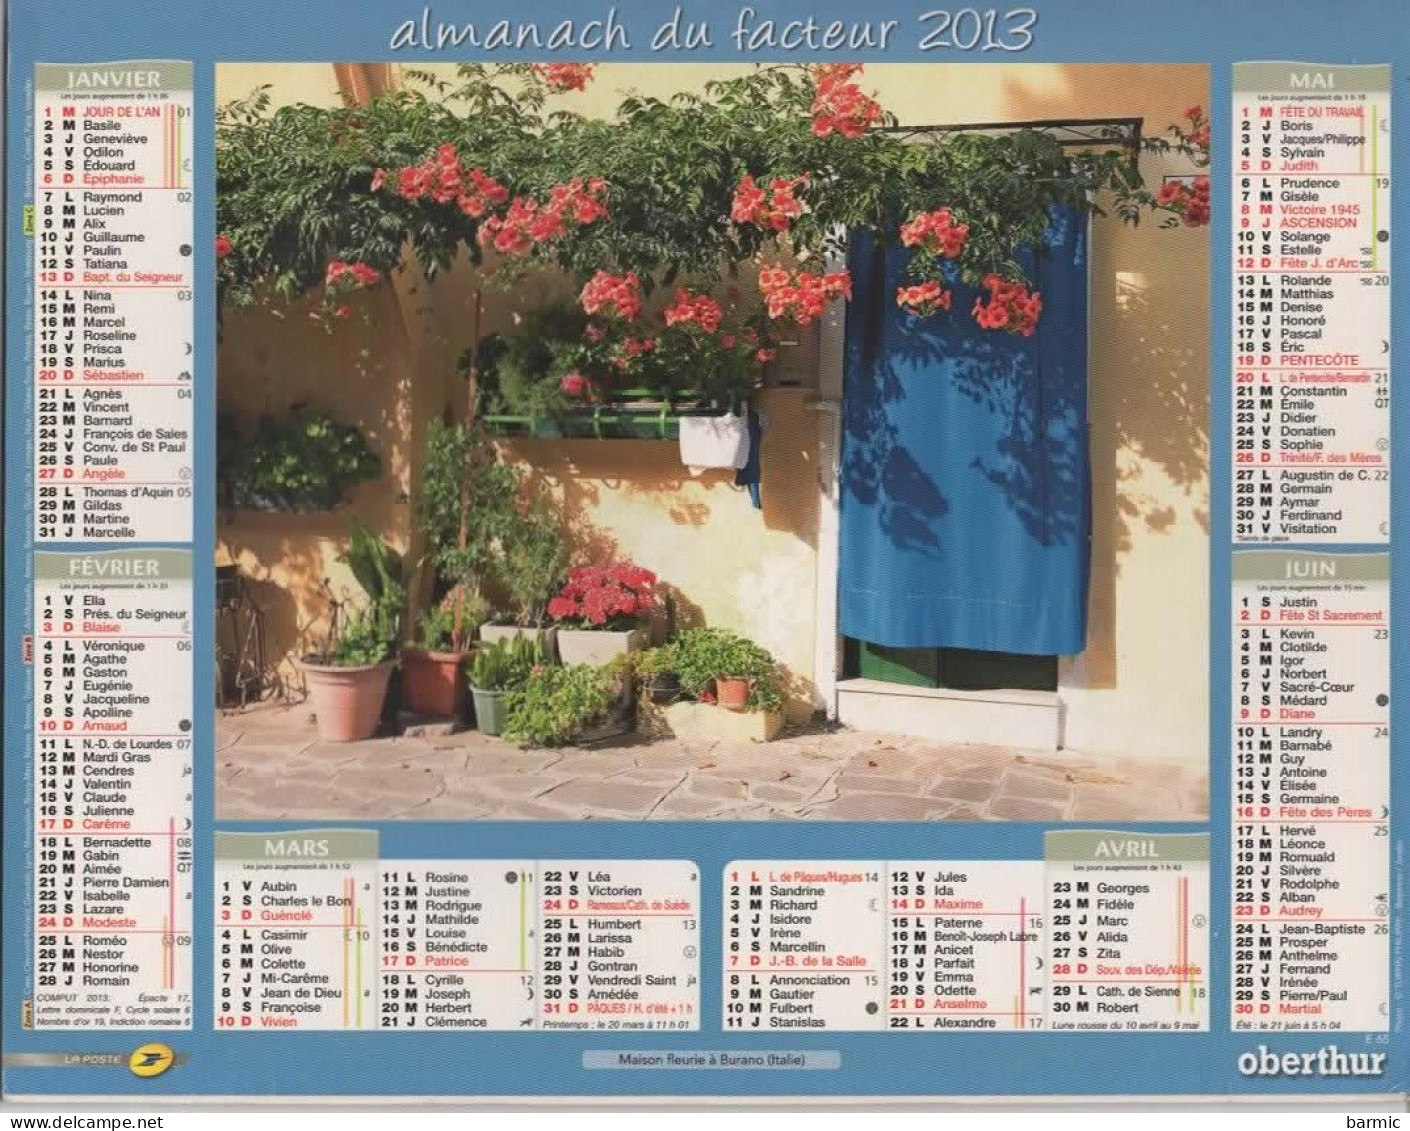 CALENDRIER ANNEE 2013, COMPLET, MAISON FLEURIE A BURANO ITALIE, CHAUMIERE A KERASCOET FINISTERE COULEUR REF 13883 - Grand Format : 2001-...